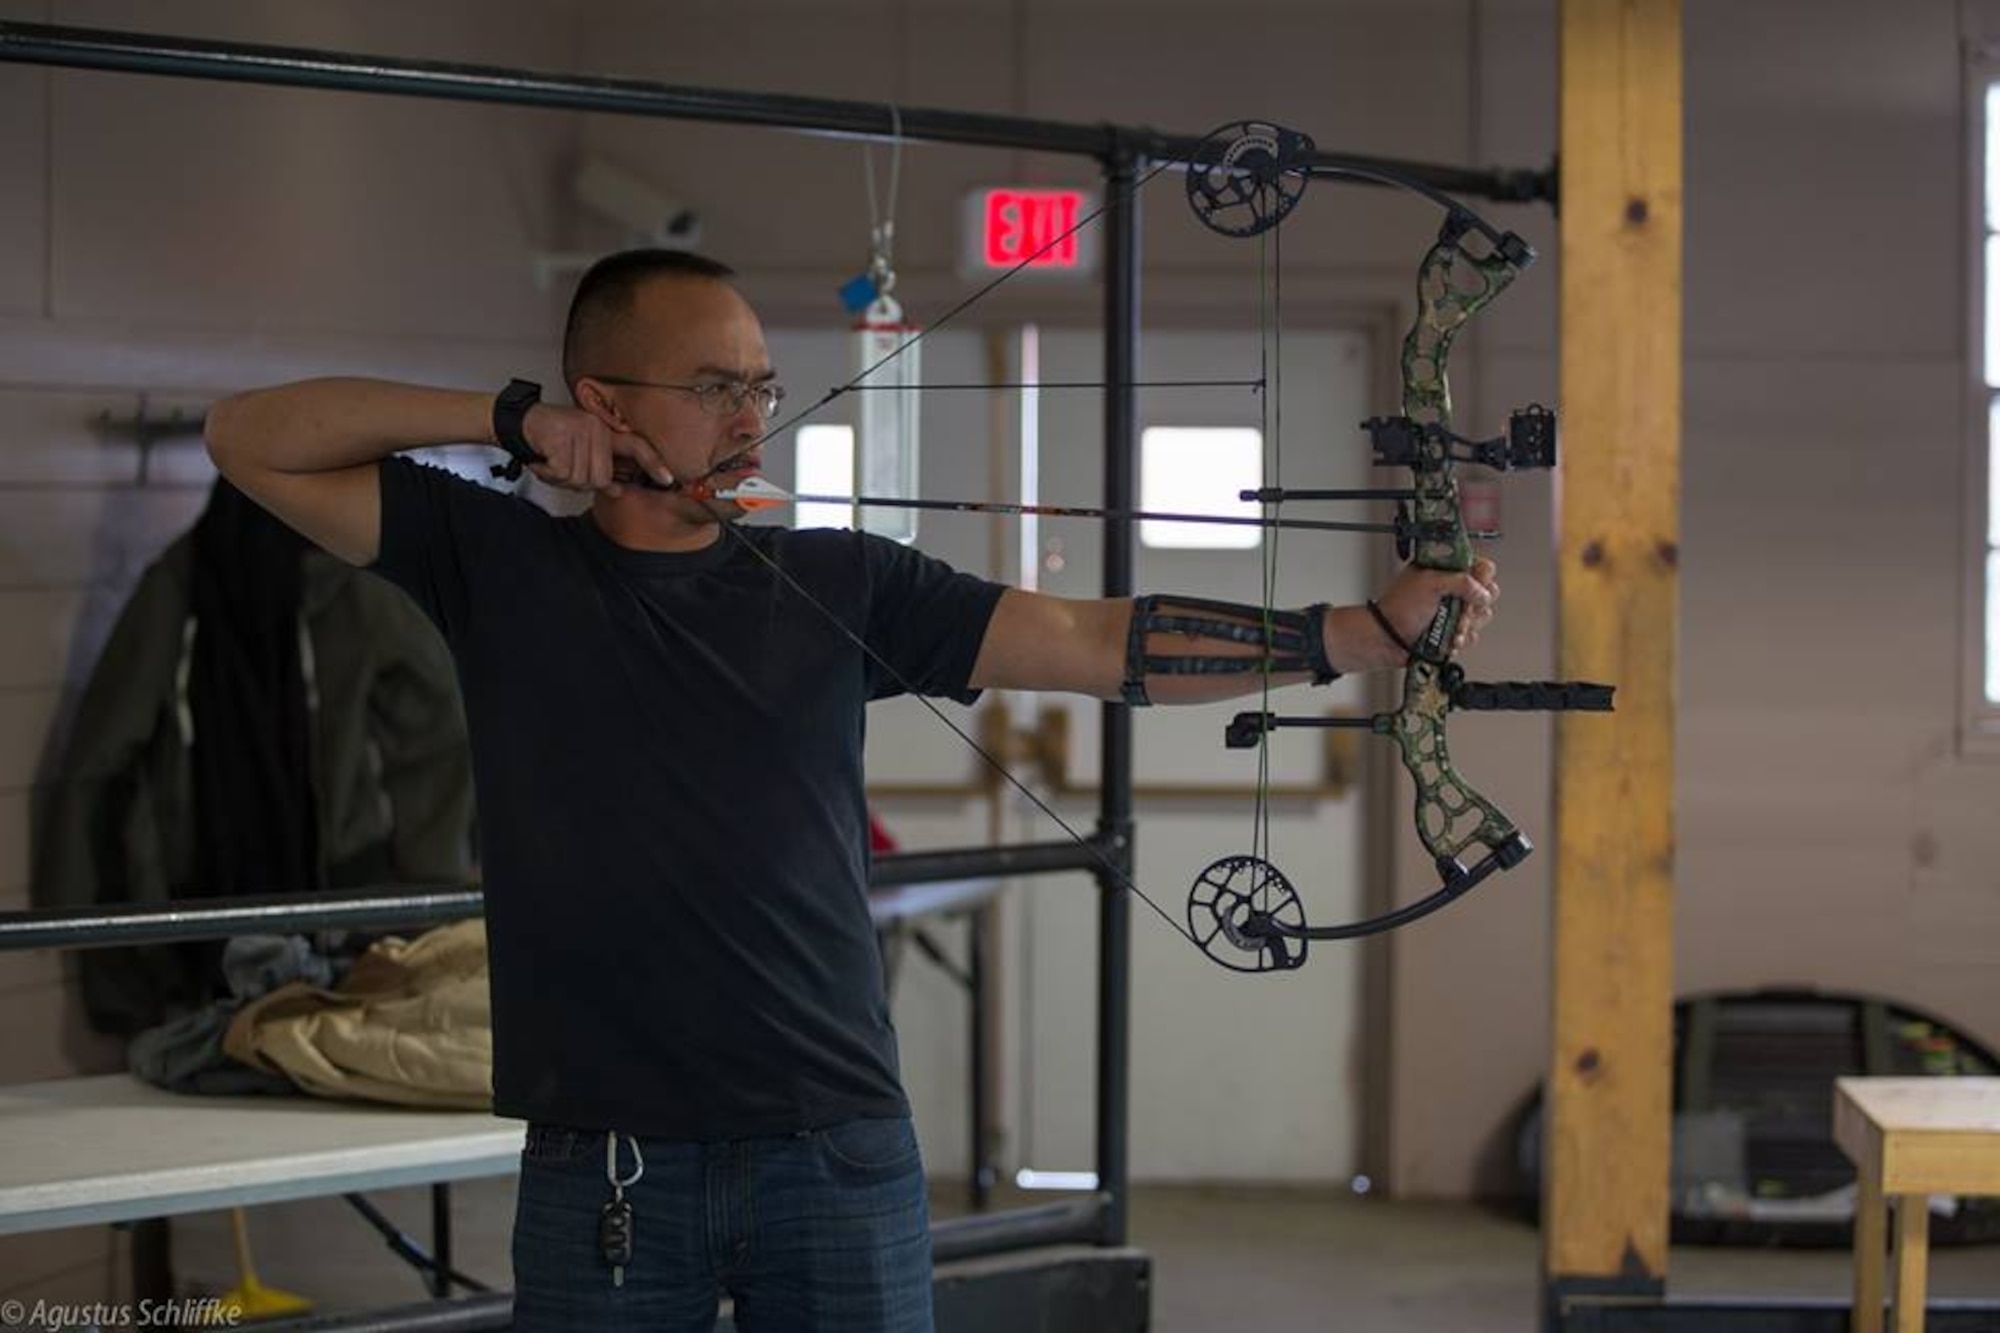 An indoor archery range is one of the many tactivities available to Airmen on base. For an annual fee, individuals receive safety training and access to equipment to practice at any time during the day. (Courtesy photo/Agustus Schliffke)
